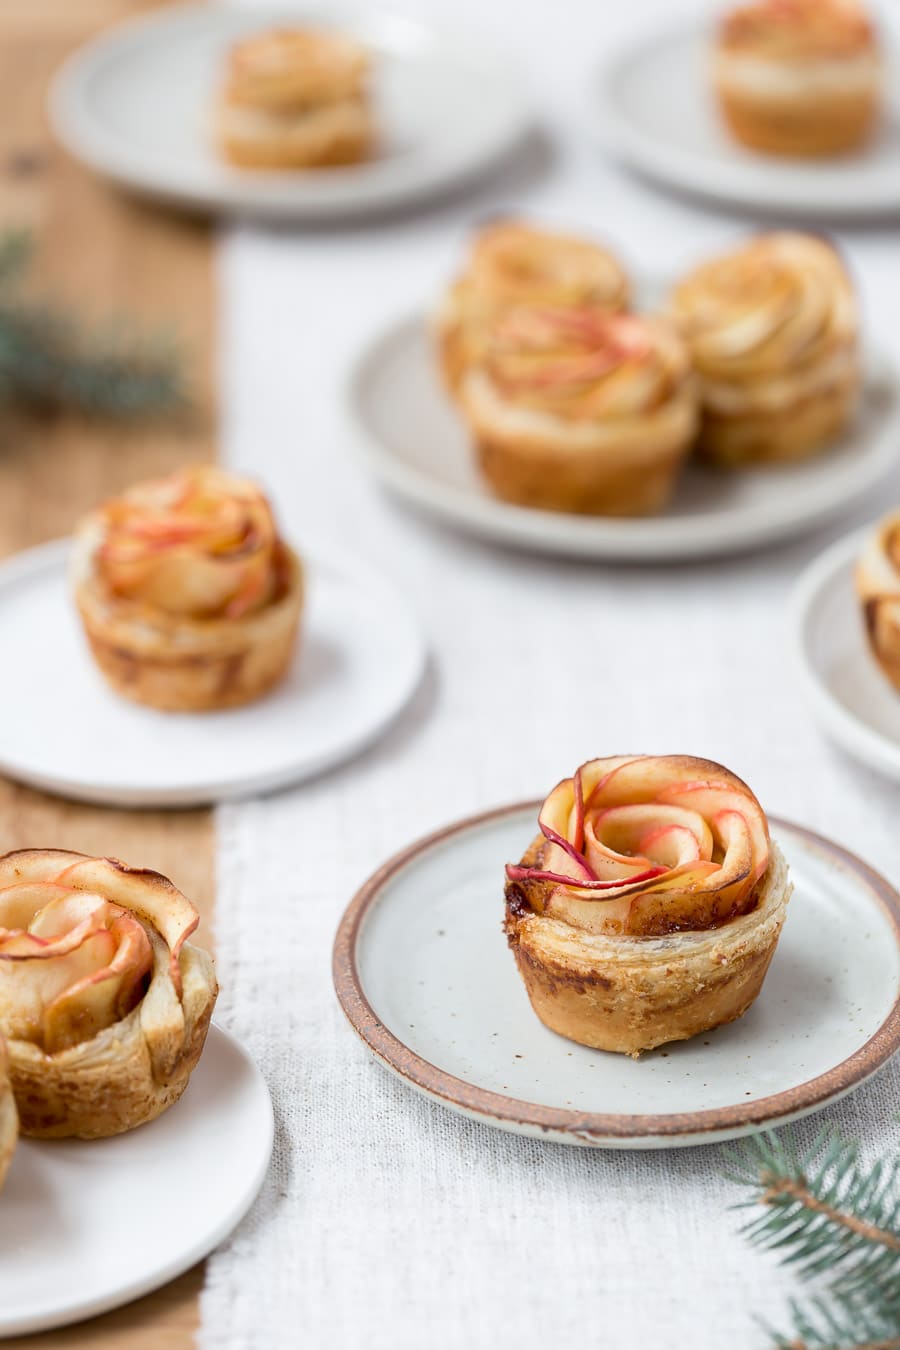 How to make apple roses pastry - Freshly baked apple roses are photographed on small plates.